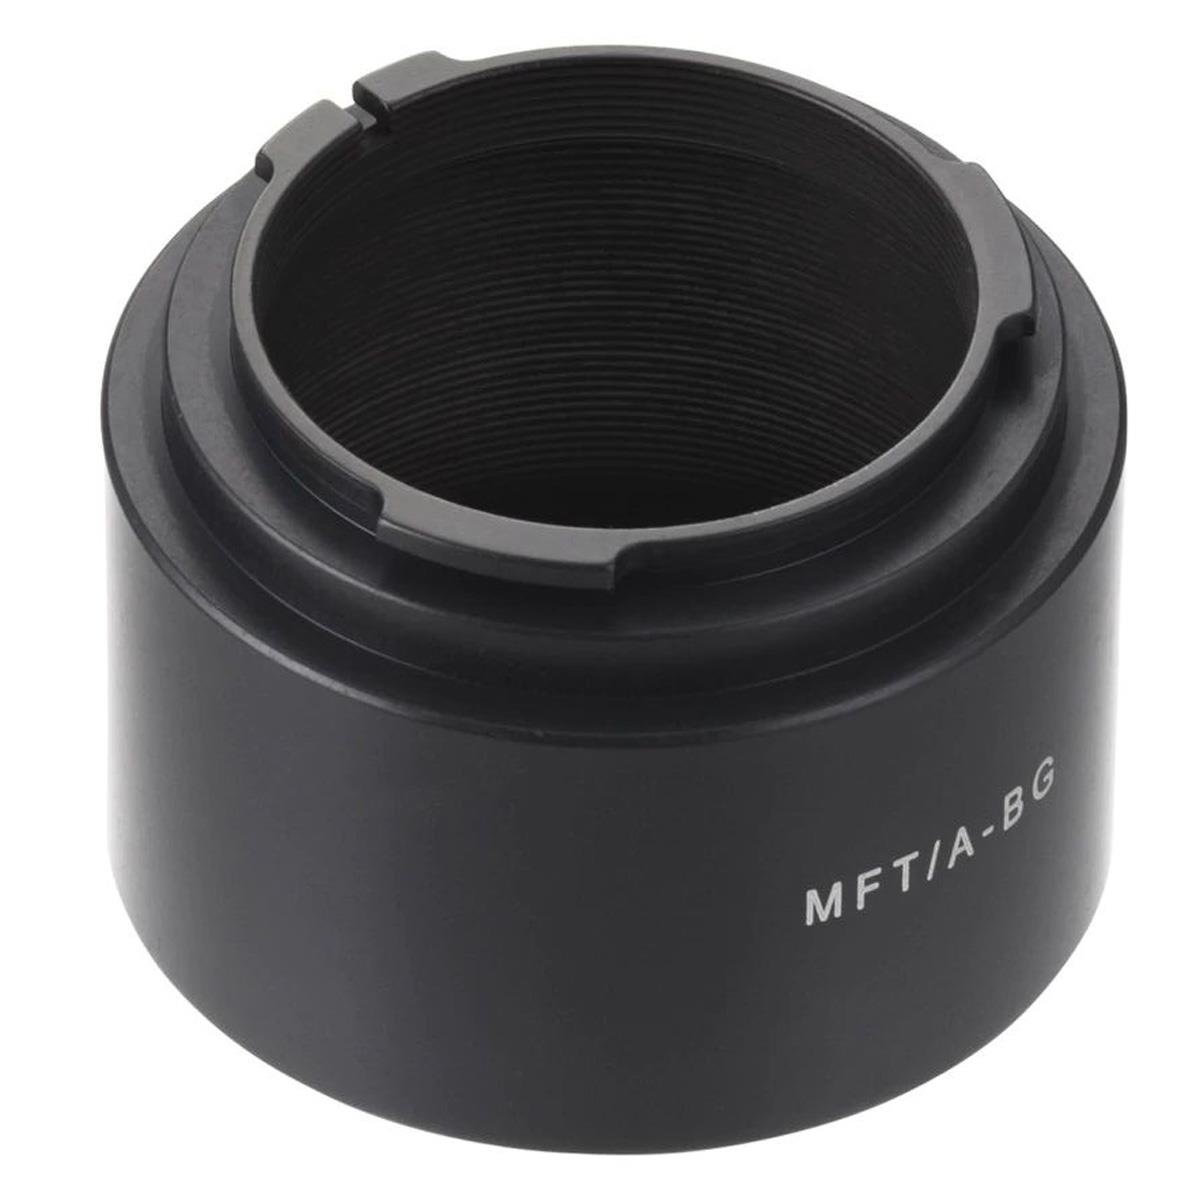 Image of Novoflex Bellows Adapter for A-Mount Lens to Micro Four Thirds Mount Camera